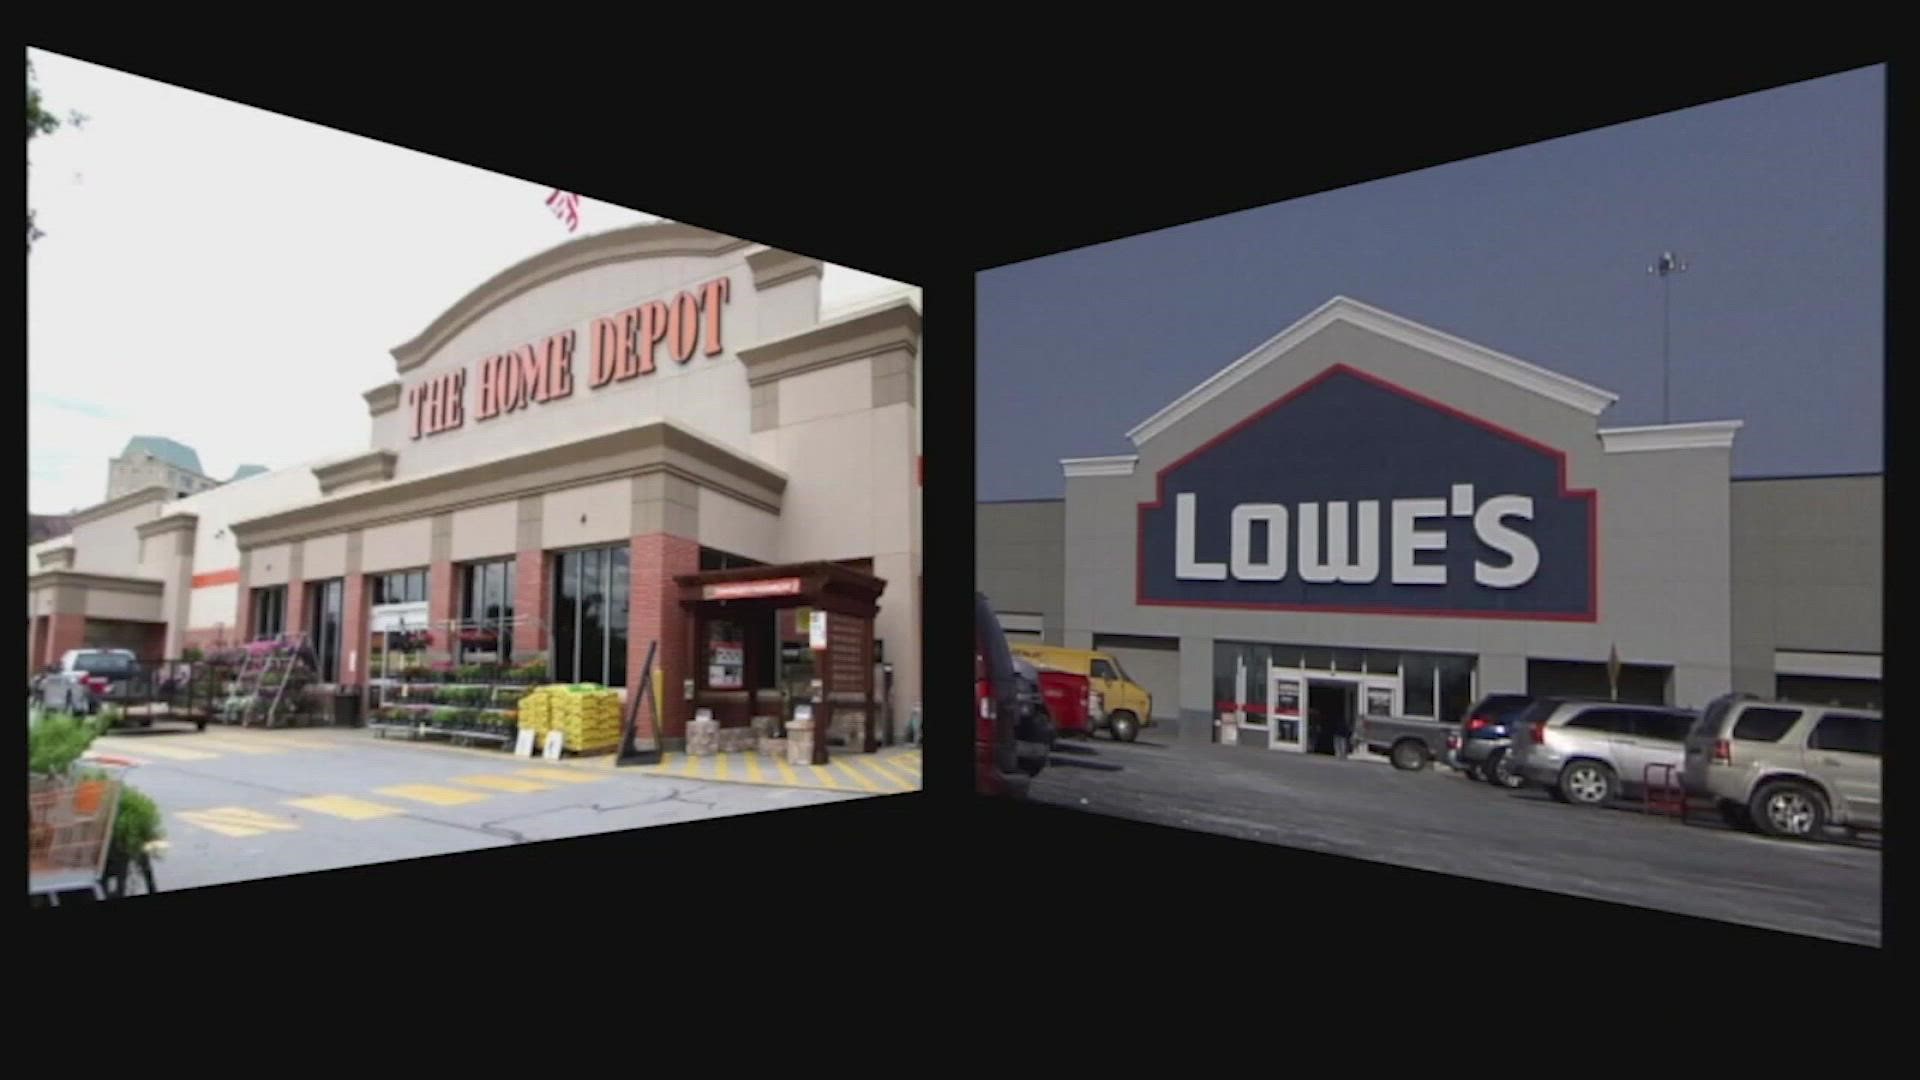 Which home improvement chain is better for your fall projects? Here's a comparison of the two stores.